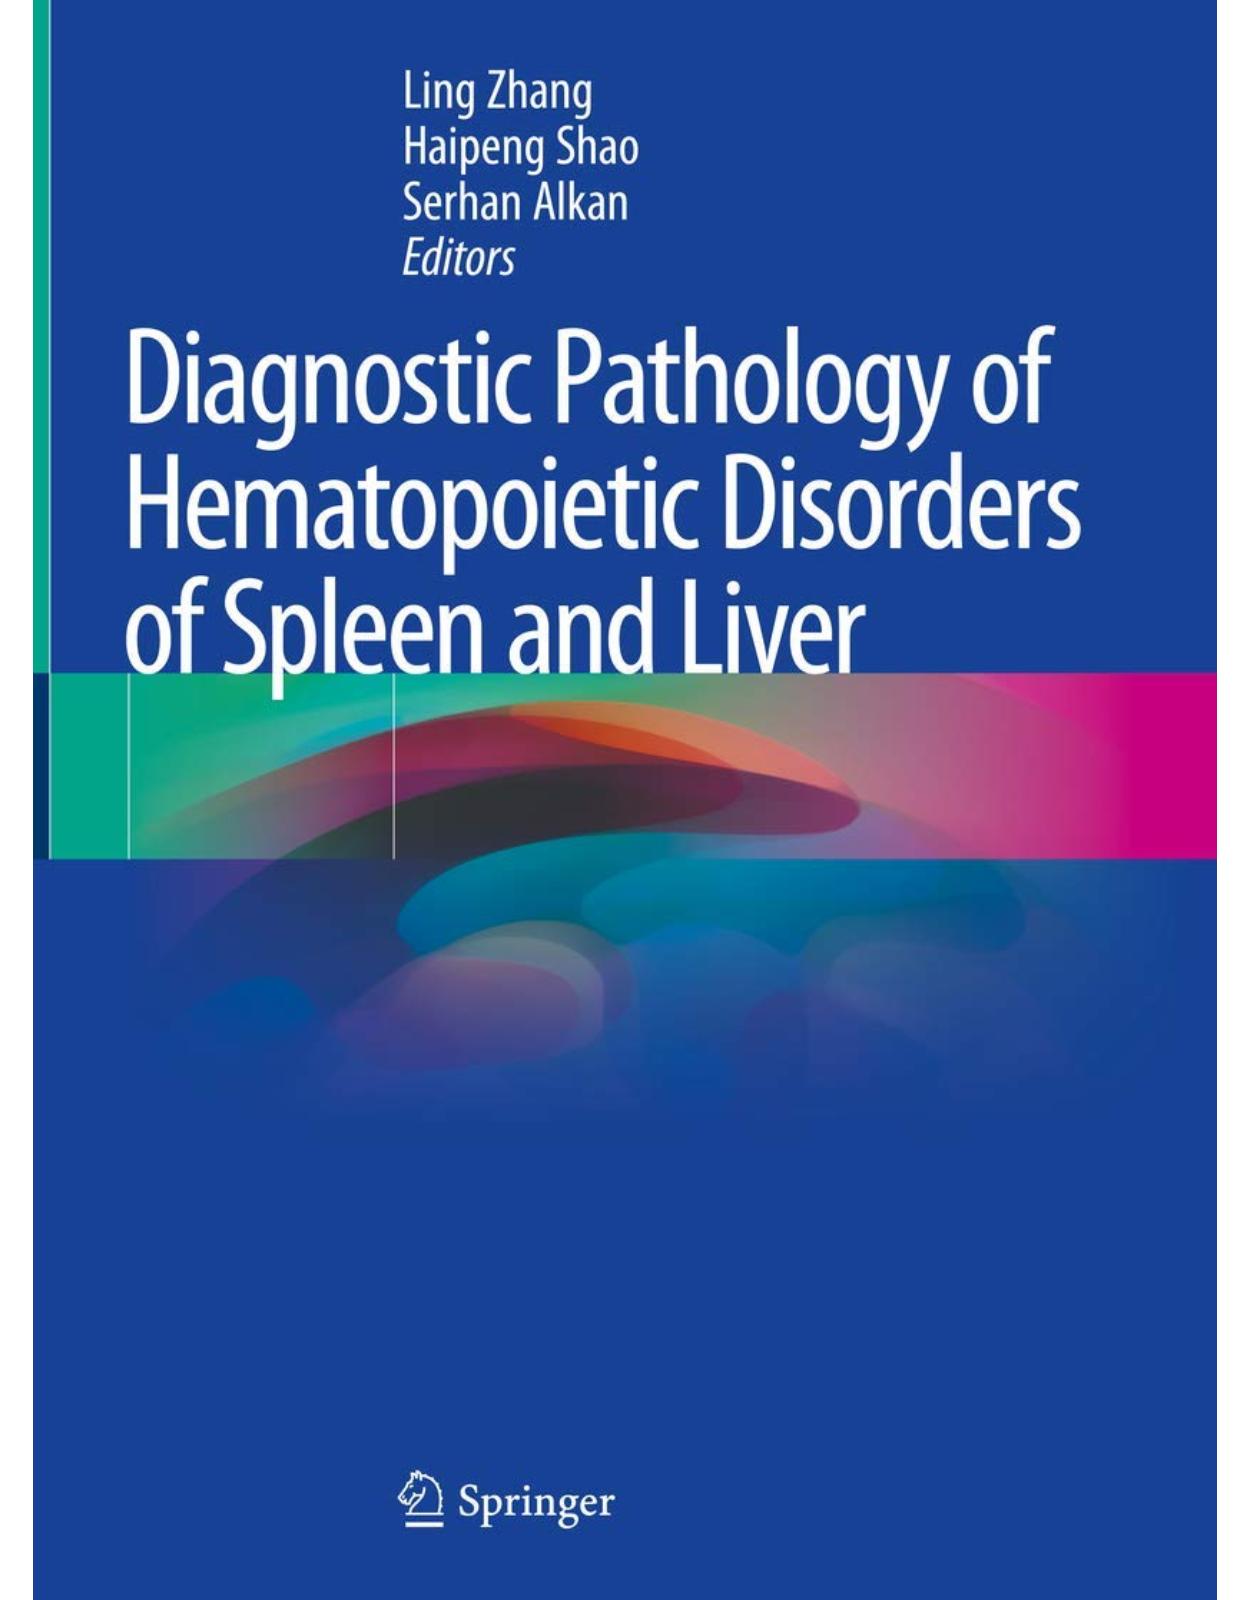 Diagnostic Pathology of Hematopoietic Disorders of Spleen and Liver 